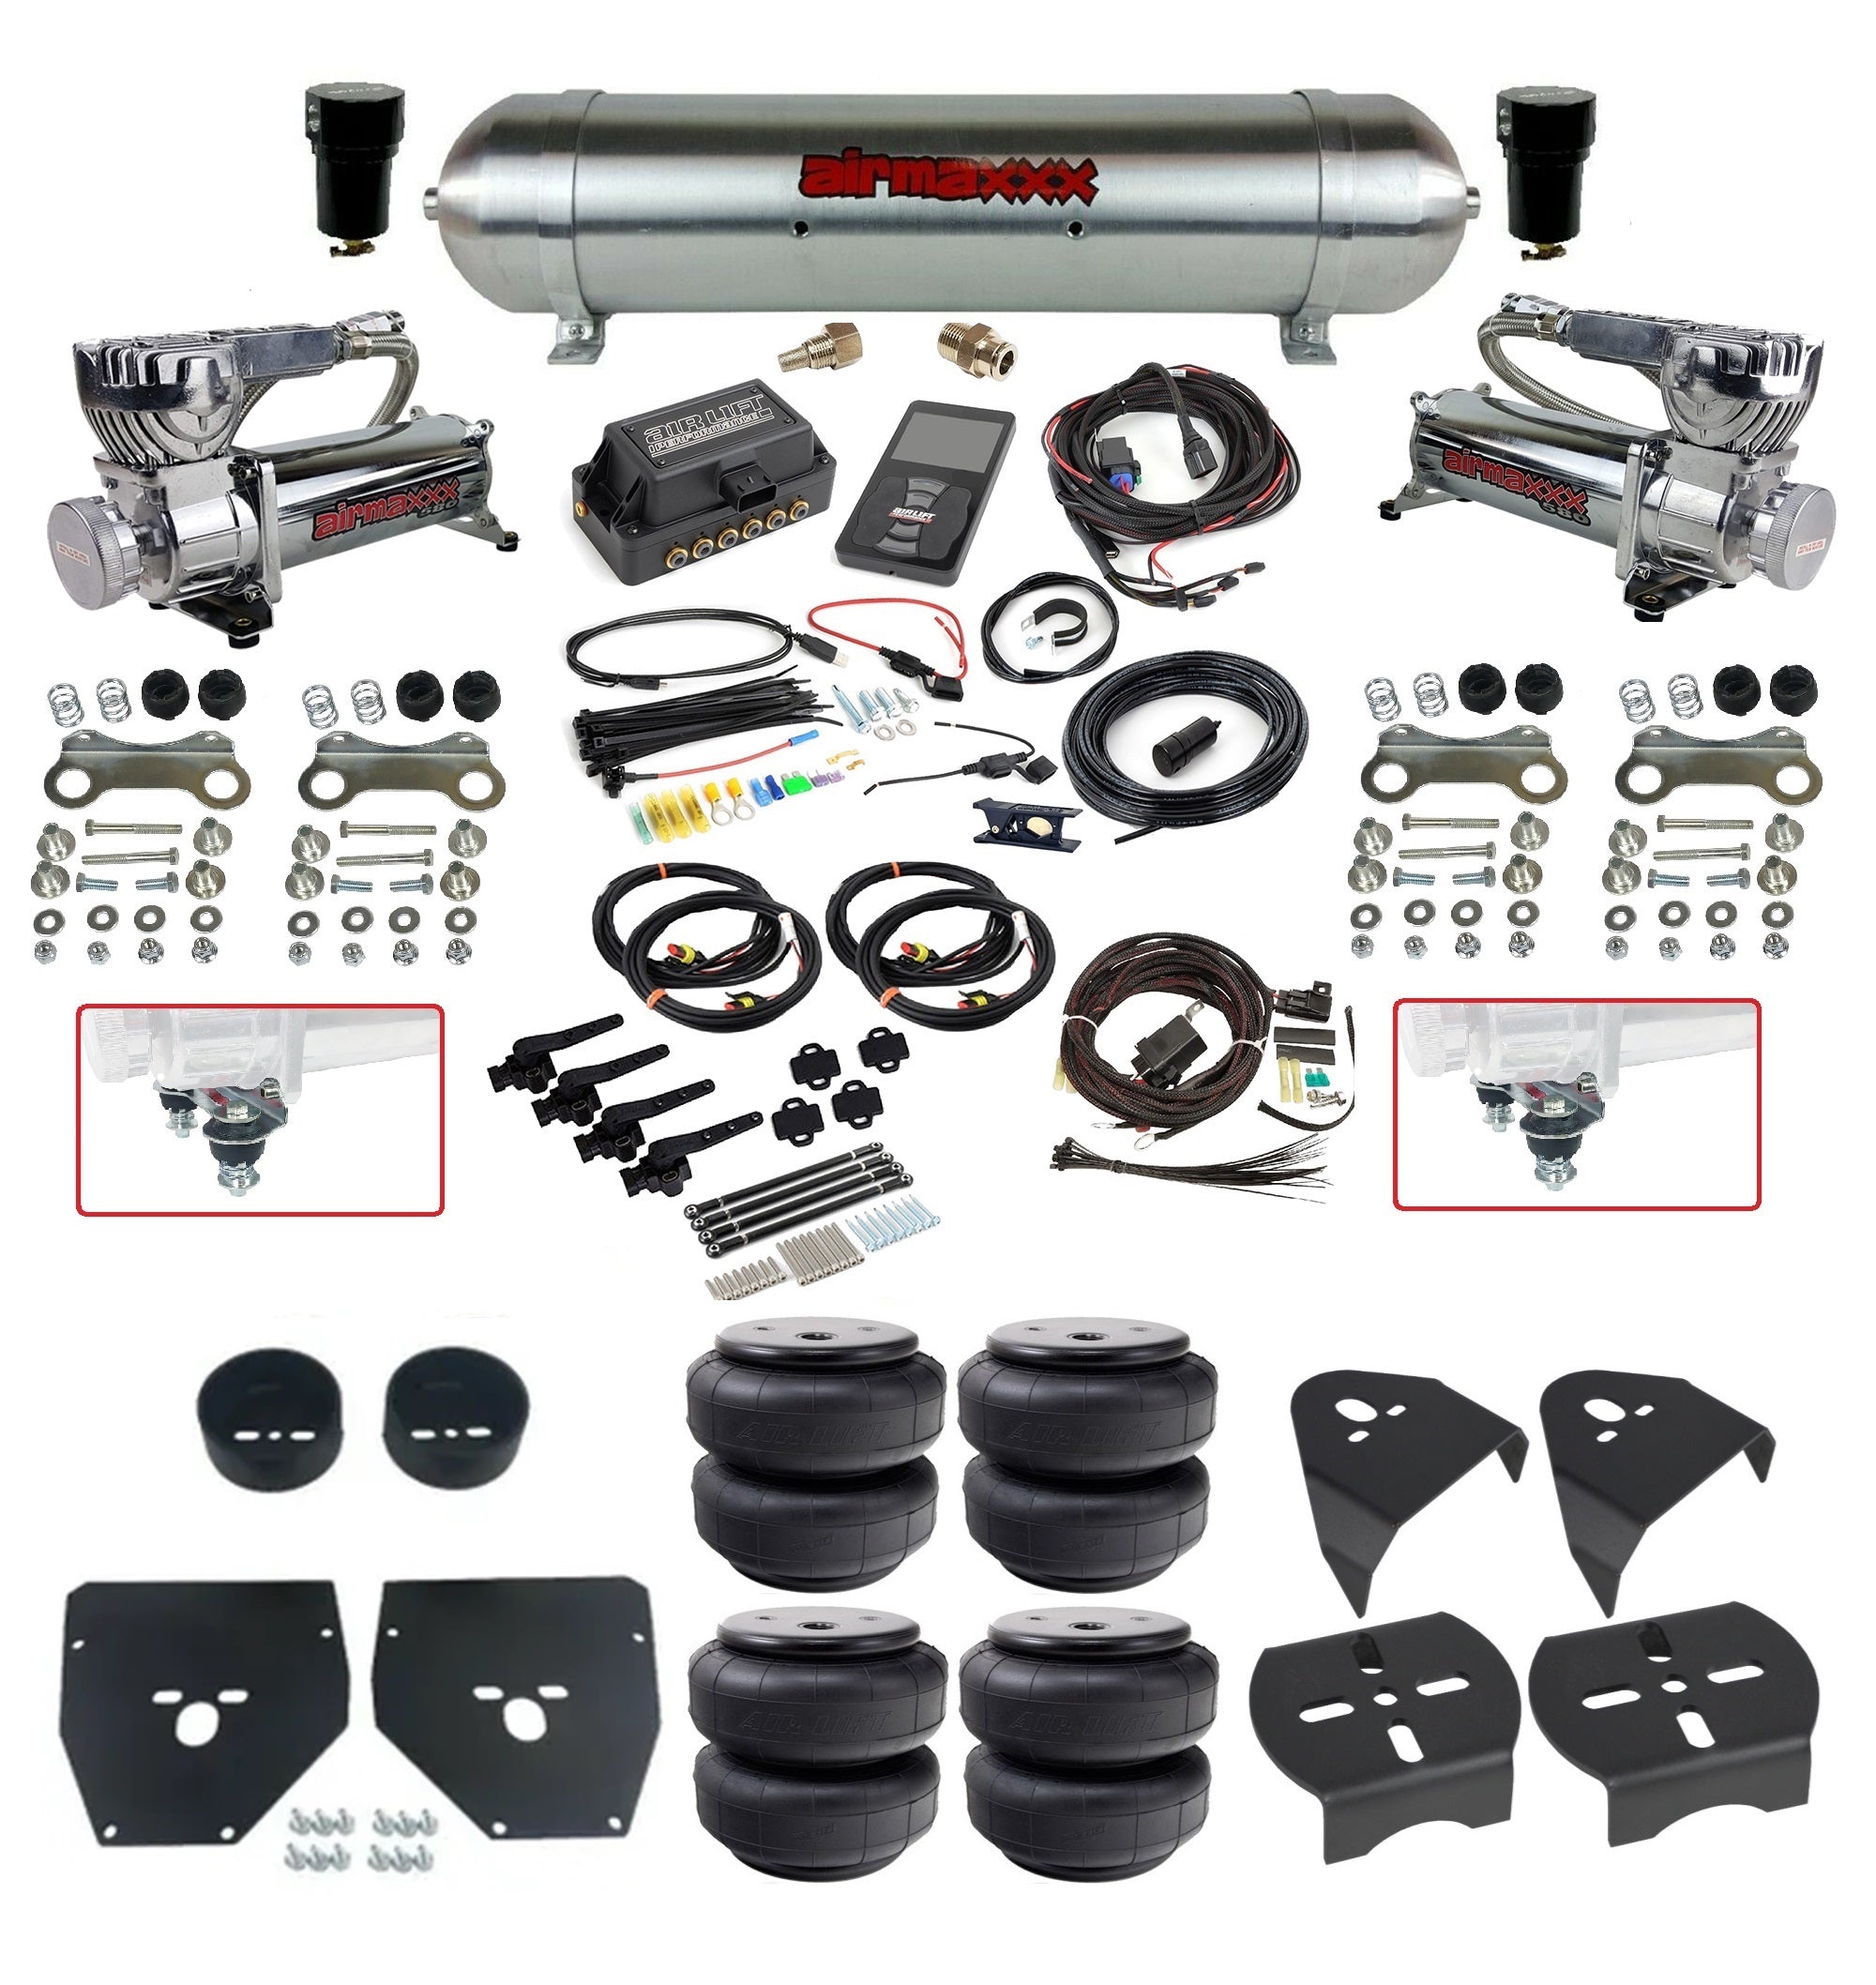 Chevrolet Complete Air Ride Suspension Kit 27695 3/8 3H Air Lift Chrome 580  For 7193-1987 C10 2wd – airslamit